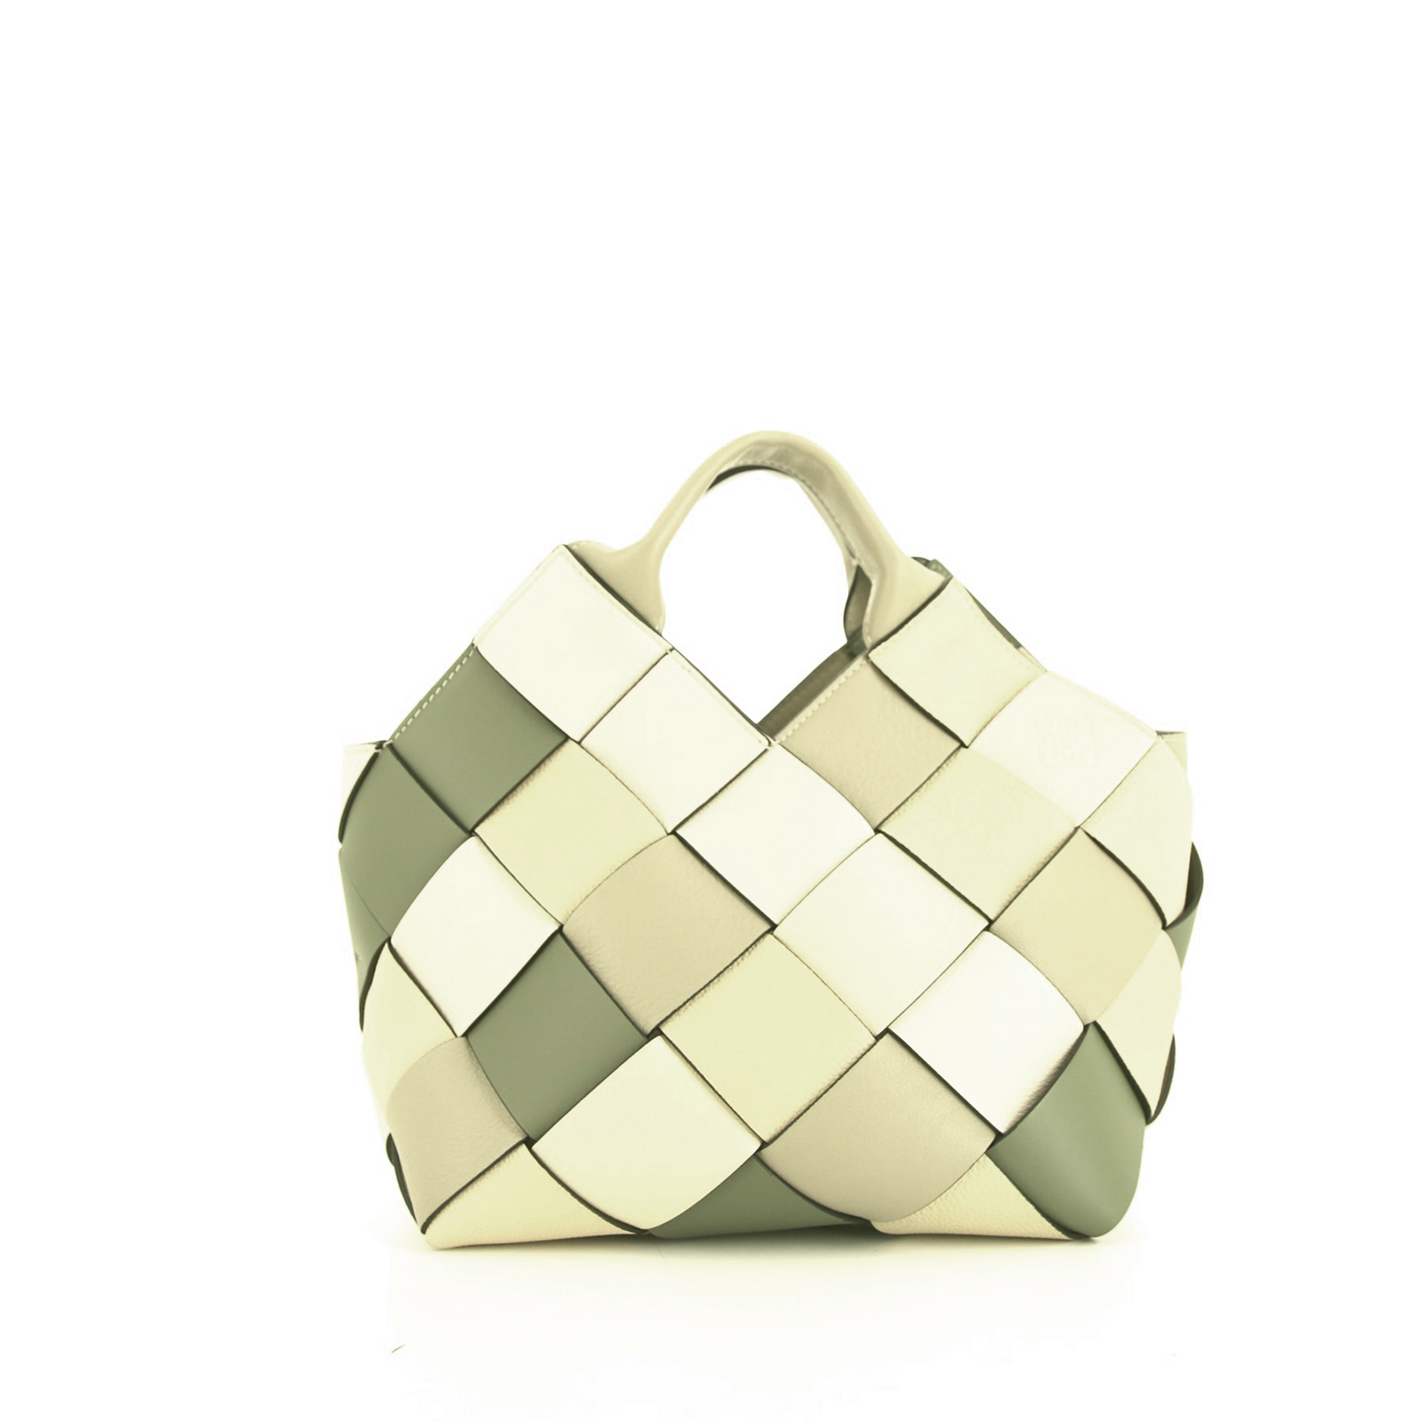 Woven Shopping Bag In Green And Beige Braided Leather